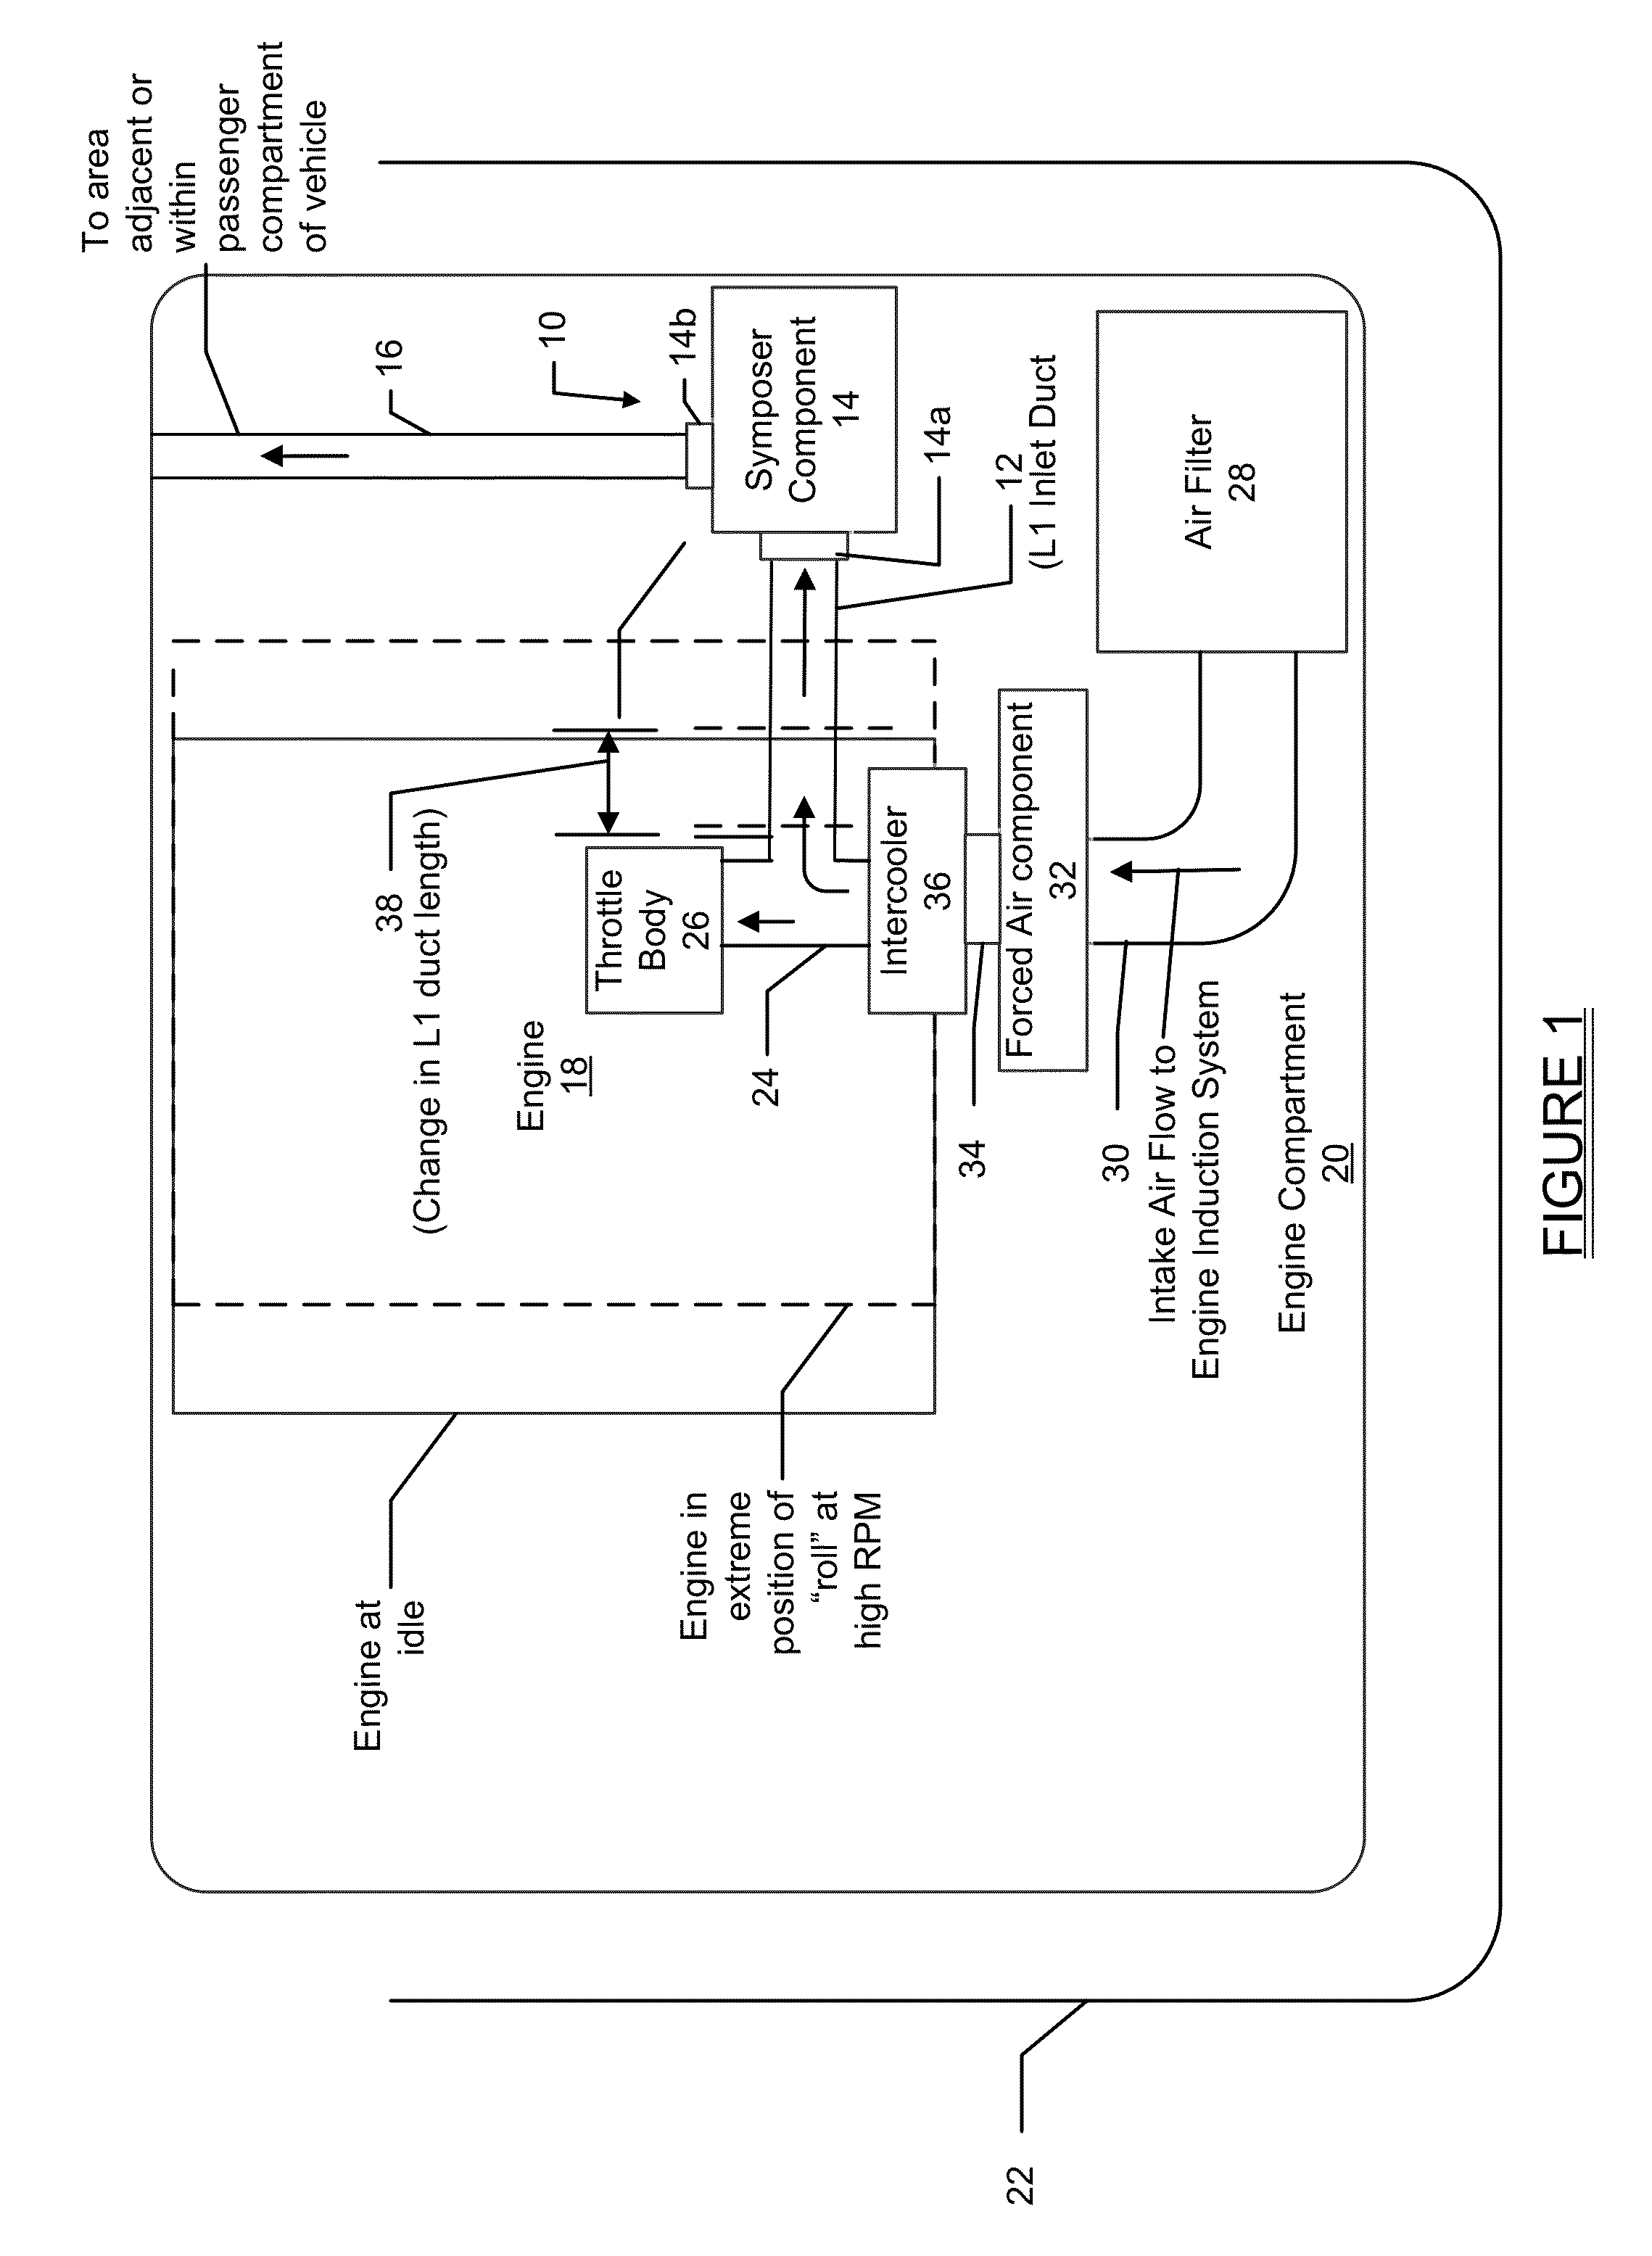 Sound amplifier system and method for amplifying engine sounds